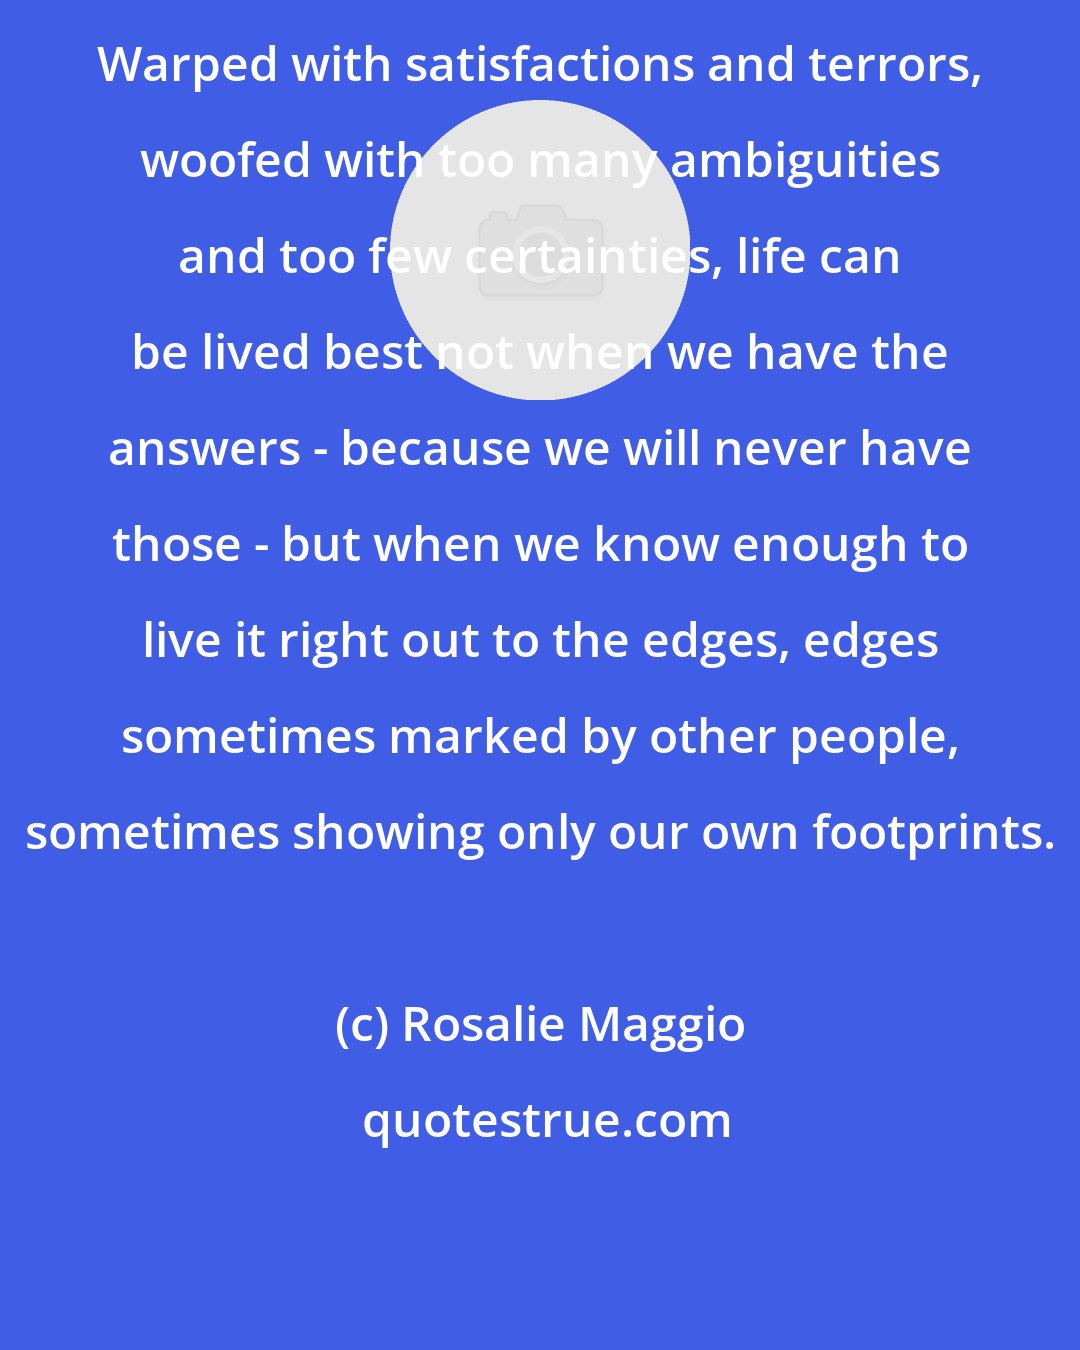 Rosalie Maggio: Warped with satisfactions and terrors, woofed with too many ambiguities and too few certainties, life can be lived best not when we have the answers - because we will never have those - but when we know enough to live it right out to the edges, edges sometimes marked by other people, sometimes showing only our own footprints.